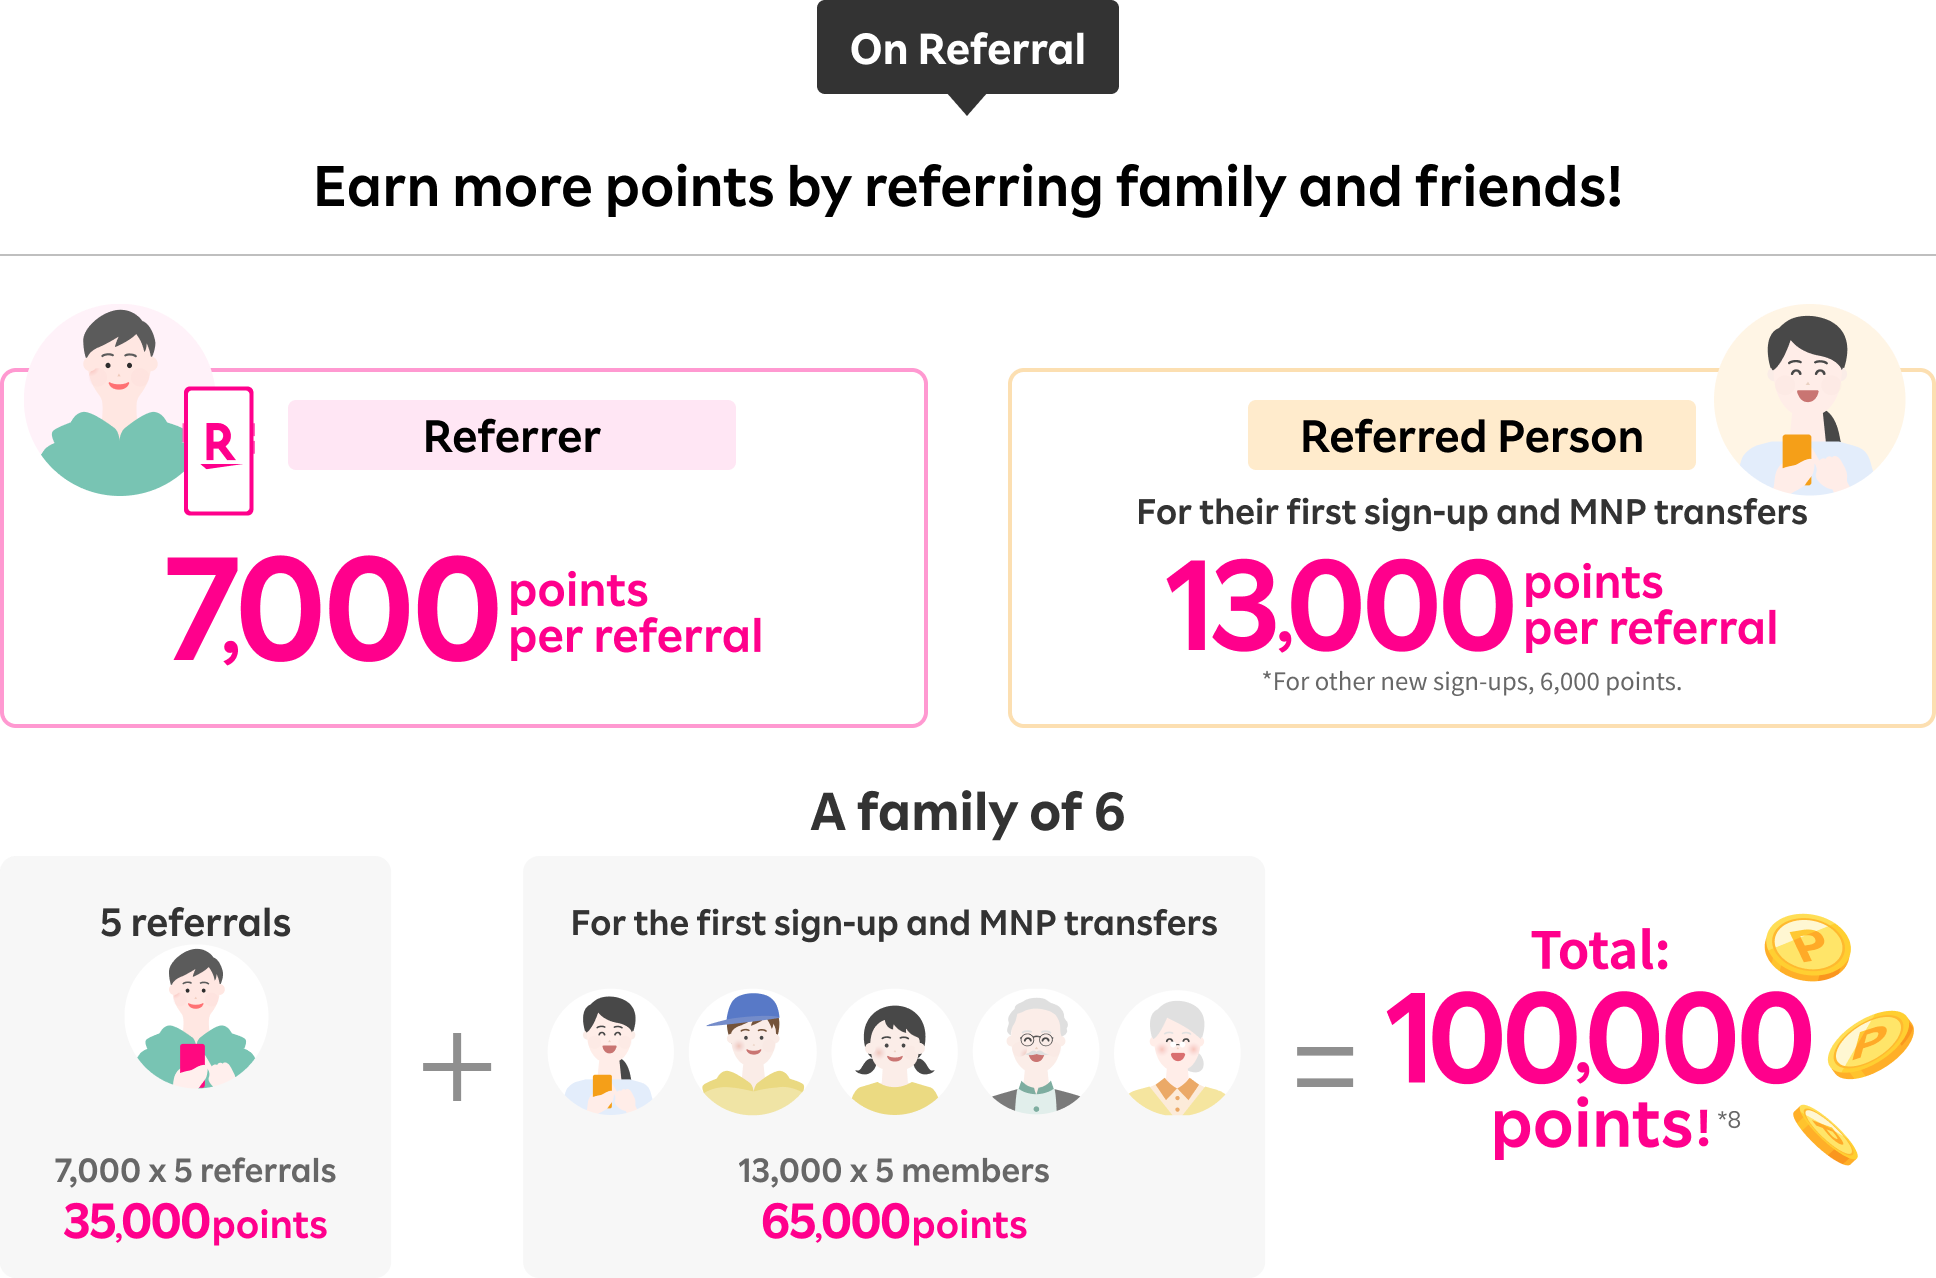 Refer your family and friends and referred person will get 7,000 points for the first-time applicants, and 13,000 points for first-time applicants with MNP transfers. If you have a family of 6, you can get 100,000 points in total.